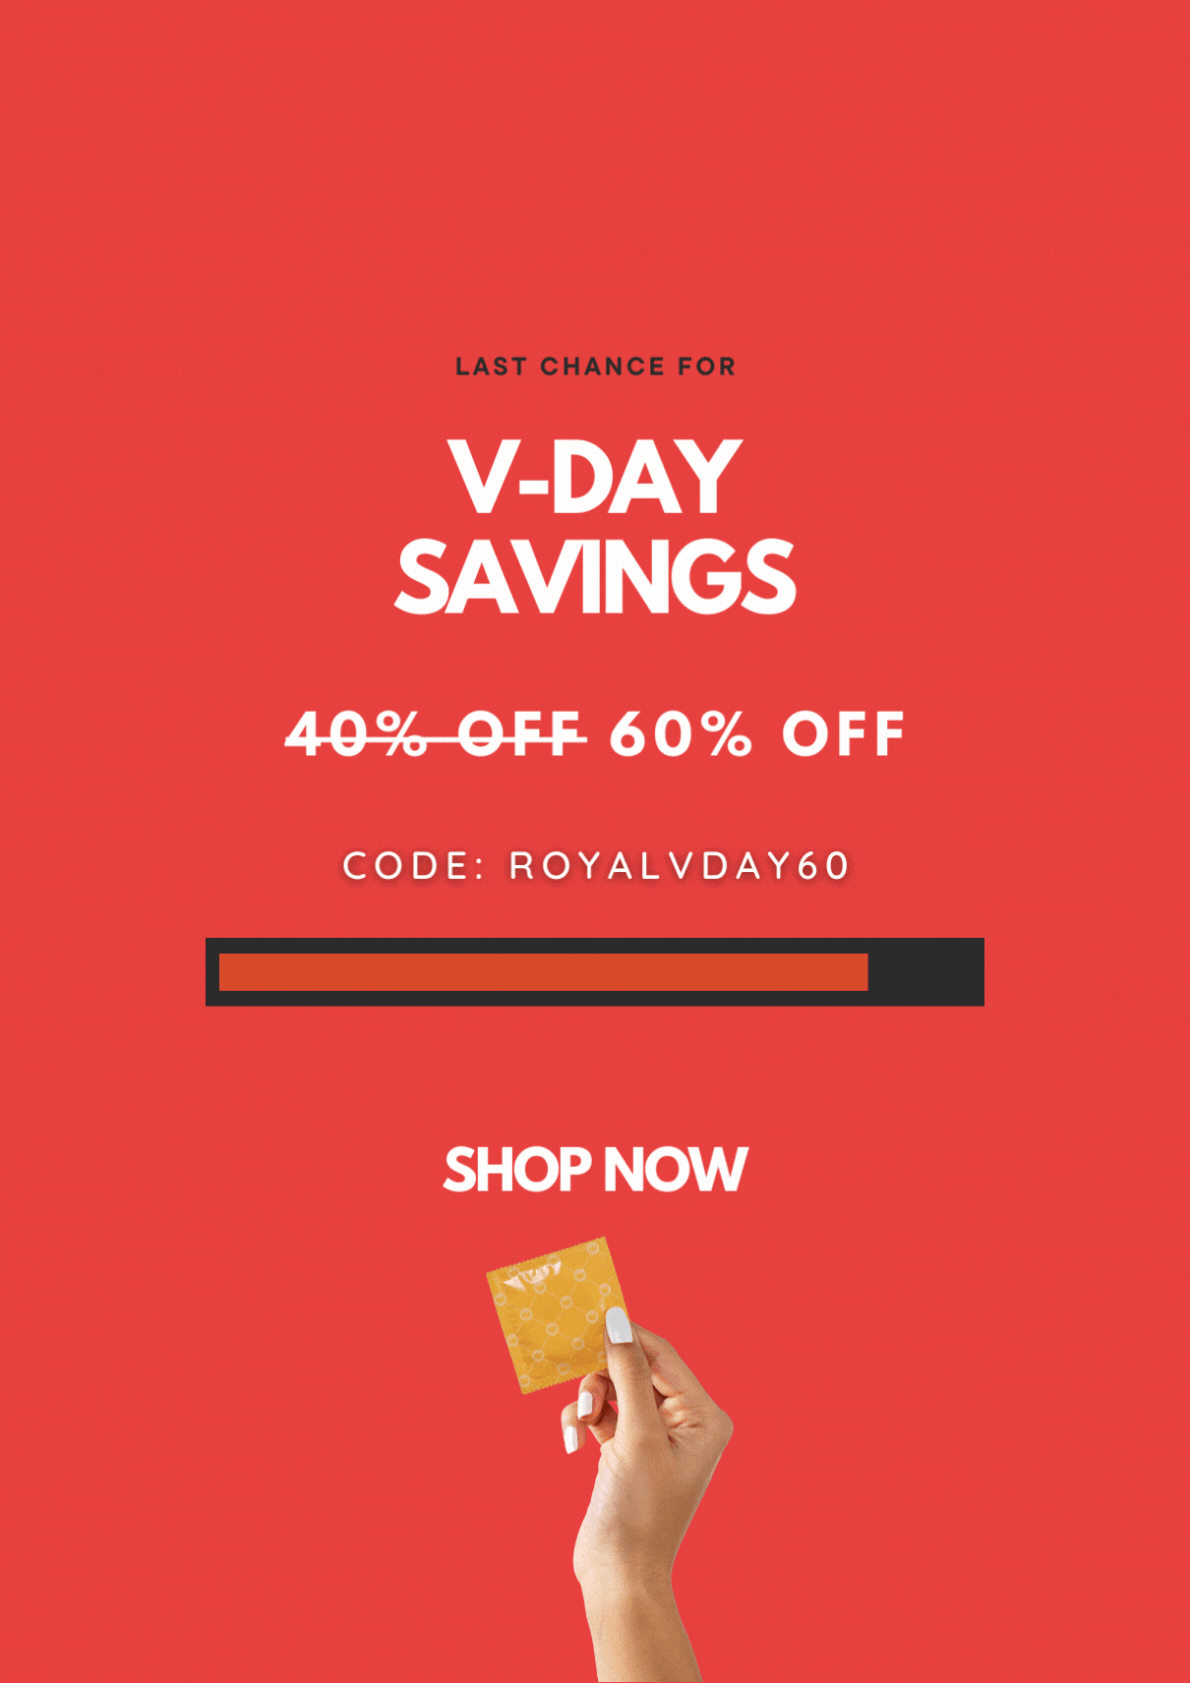 Royal VDAY Sale - 60% off everything. Code ROYALVDAY60